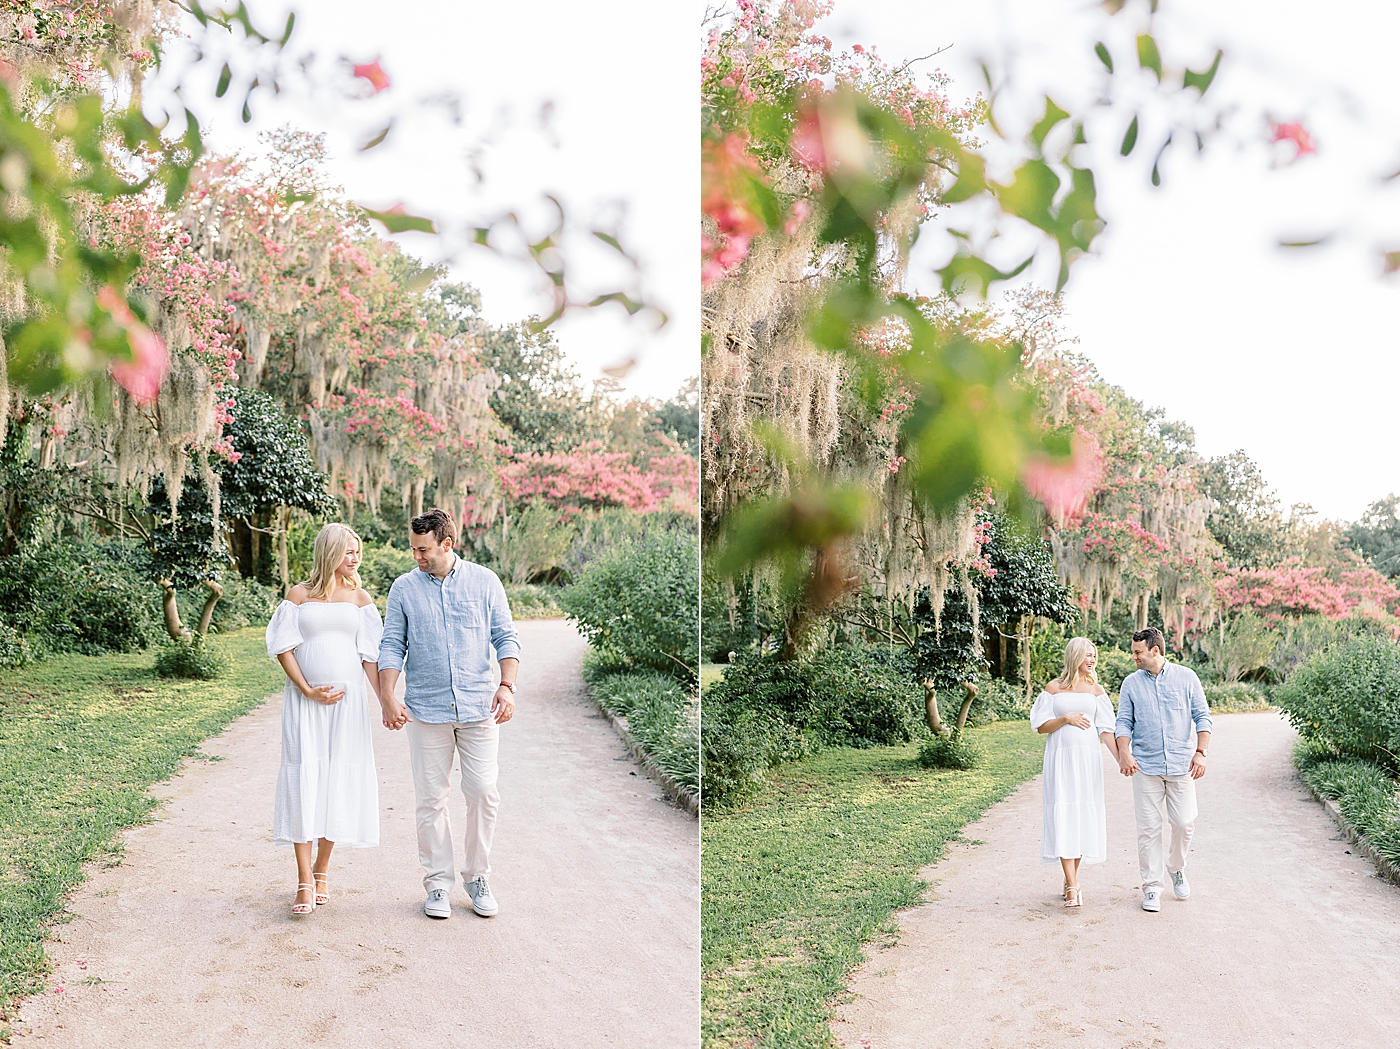 Mom and dad to be walking in the park | Dad's Wardrobe Fall Sessions with Caitlyn Motycka Photography